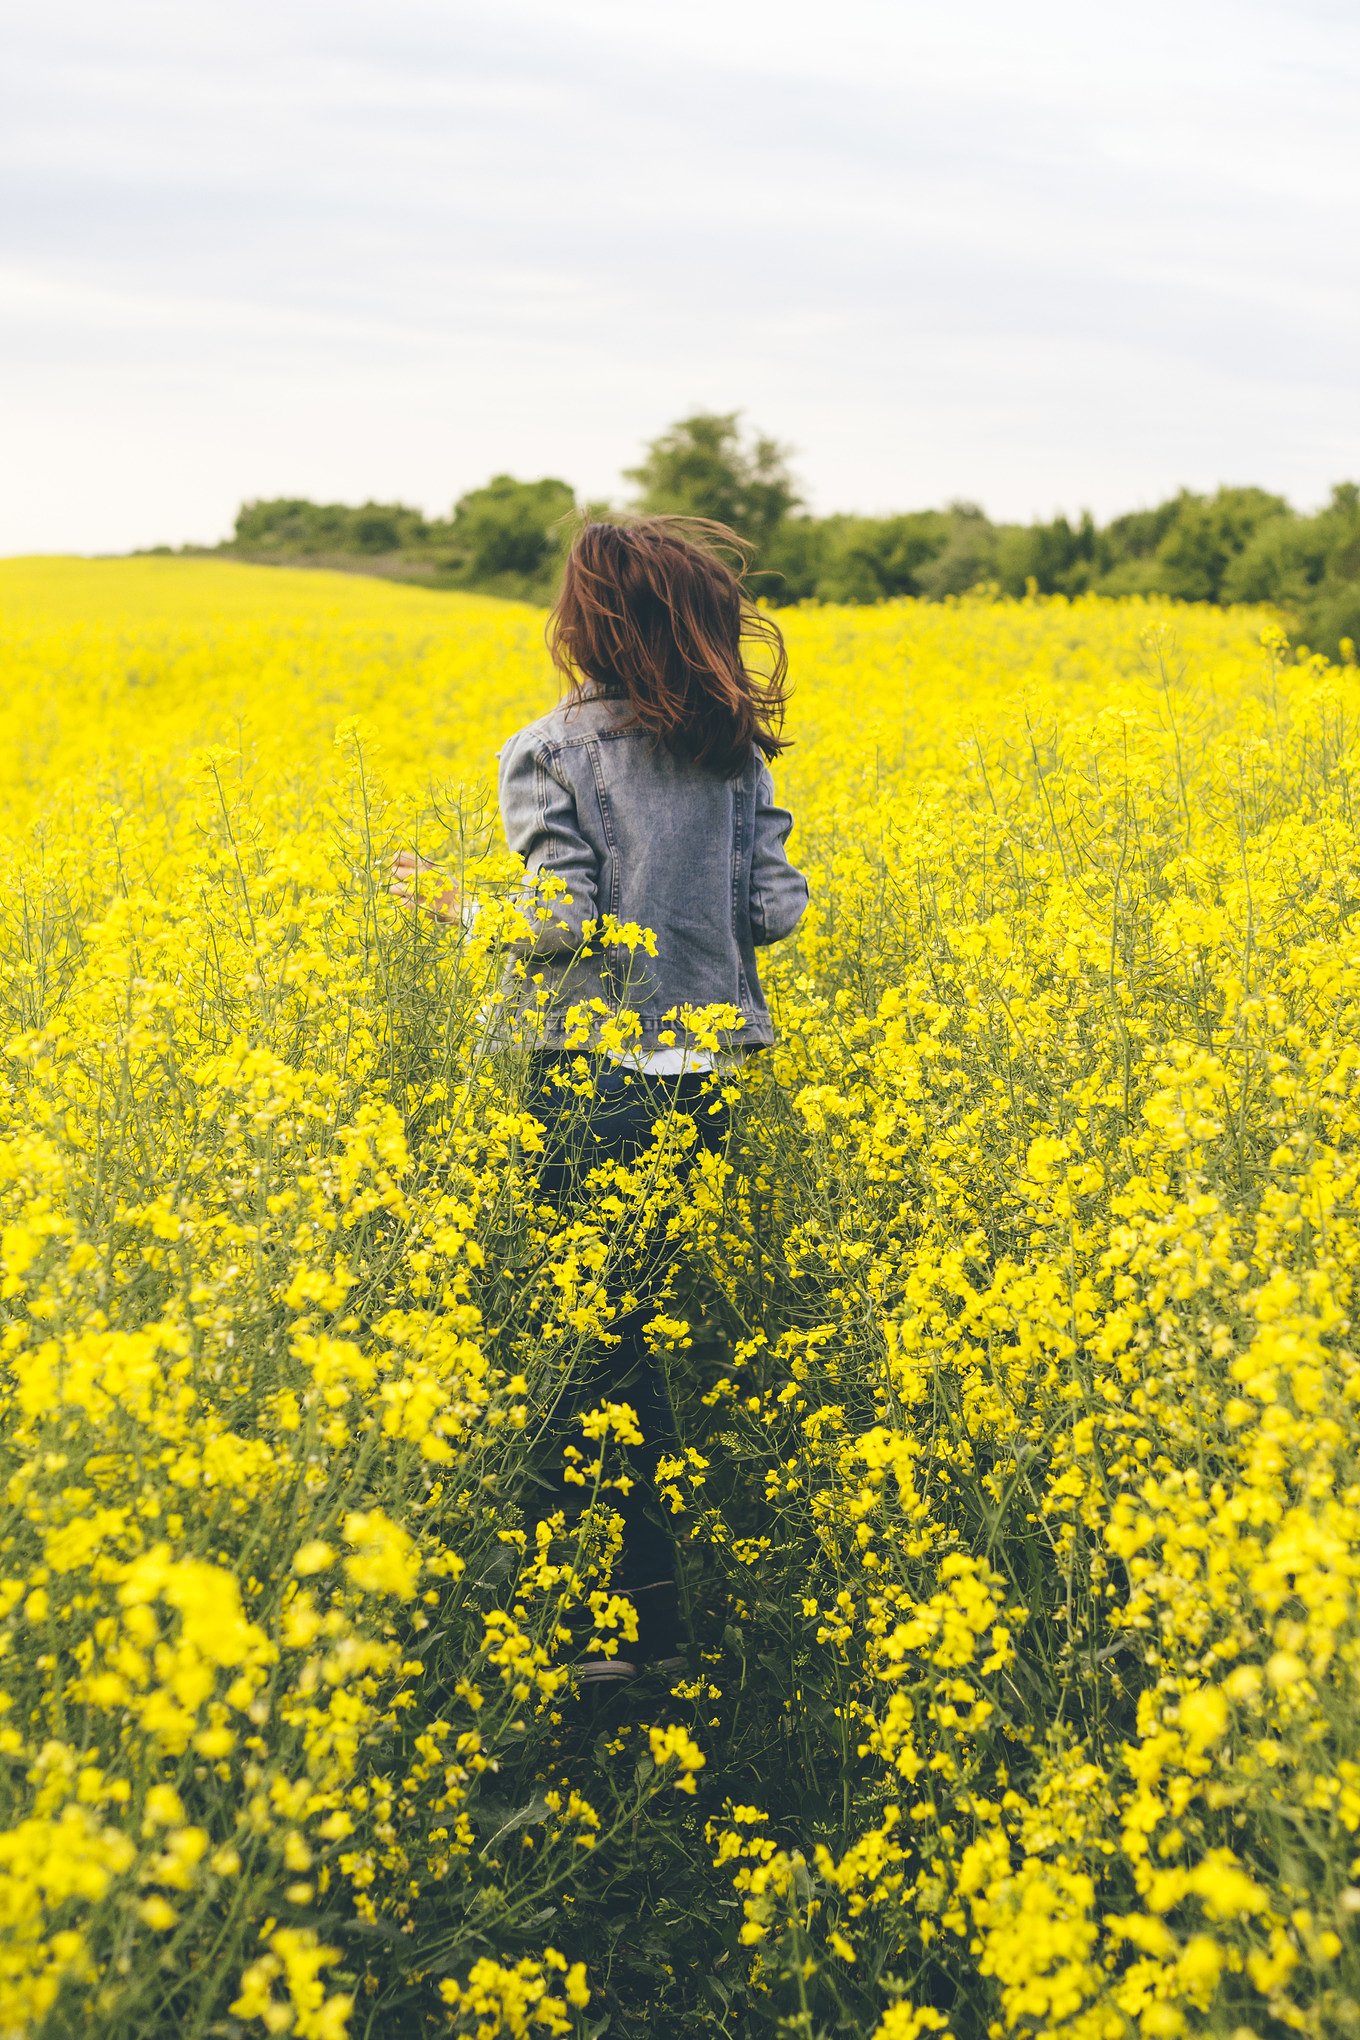 Girl running in a yellow field ~ People Photos ~ Creative Market